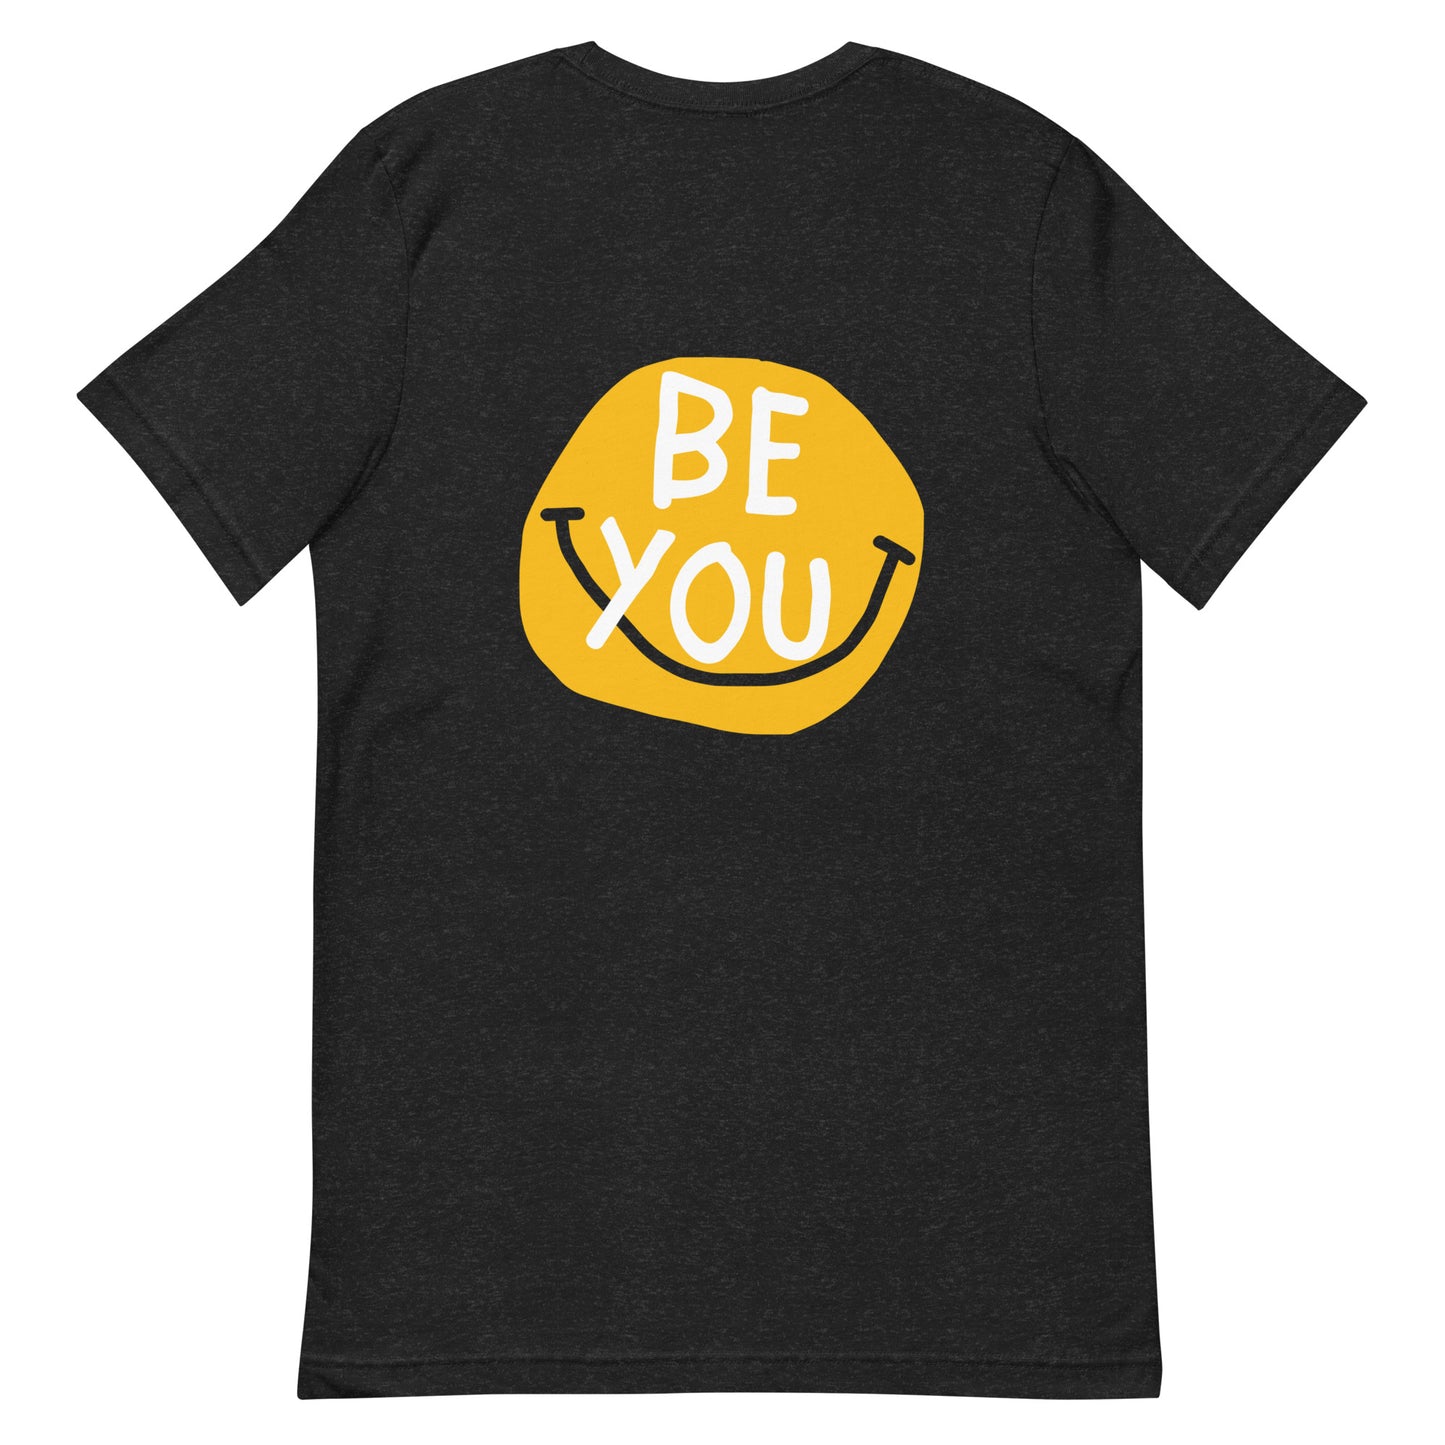 Be You Tee